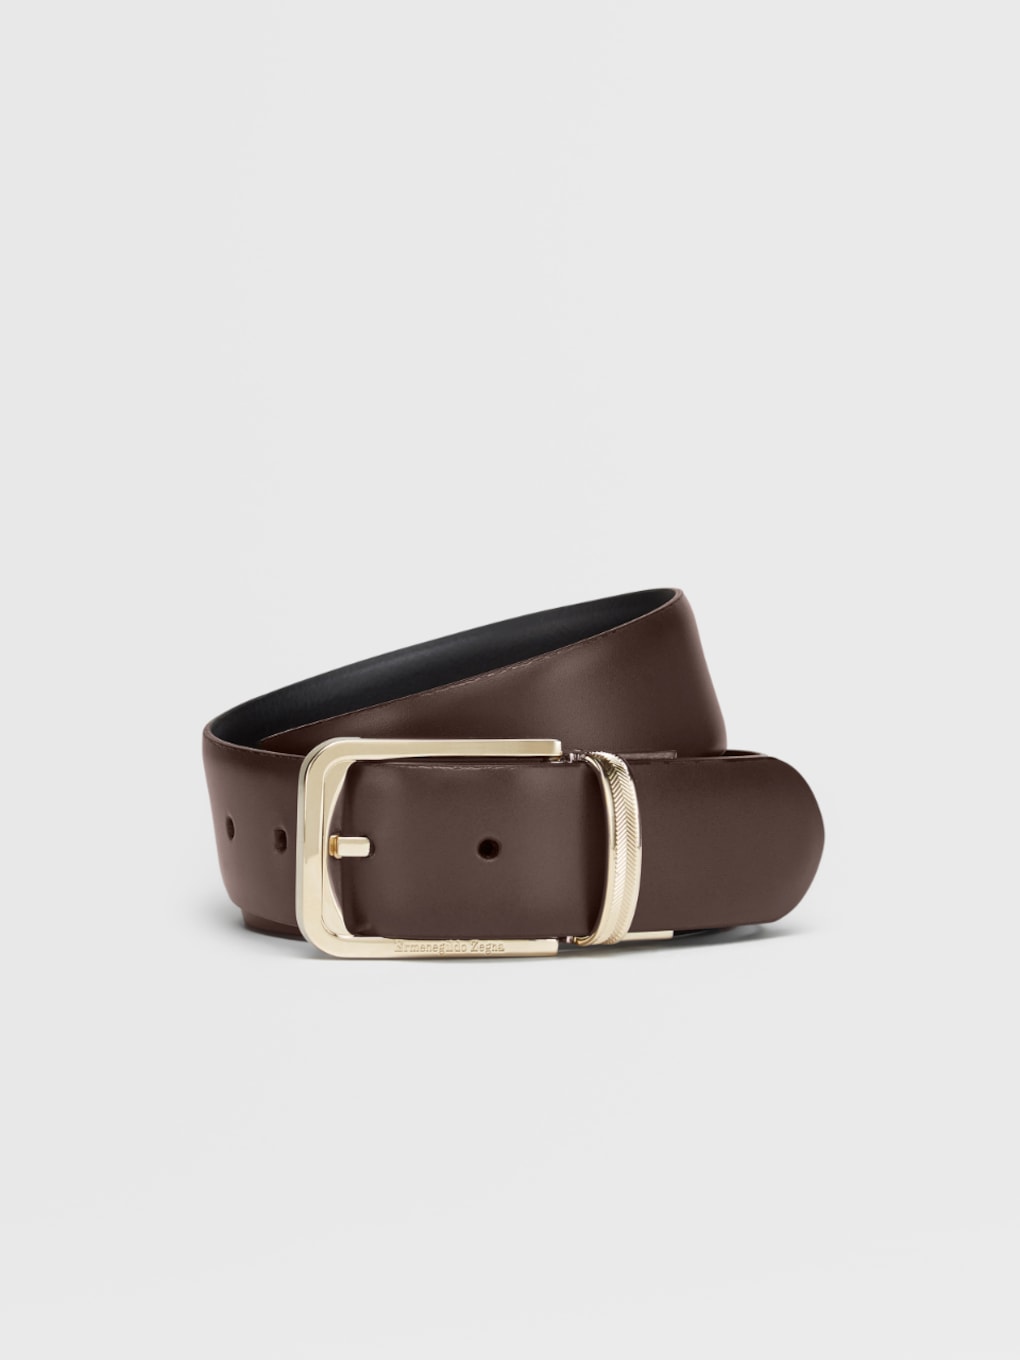 Black with White Stitching Gold-Tone Buckle Reversible Belt Wide CHARCOAL GREY 